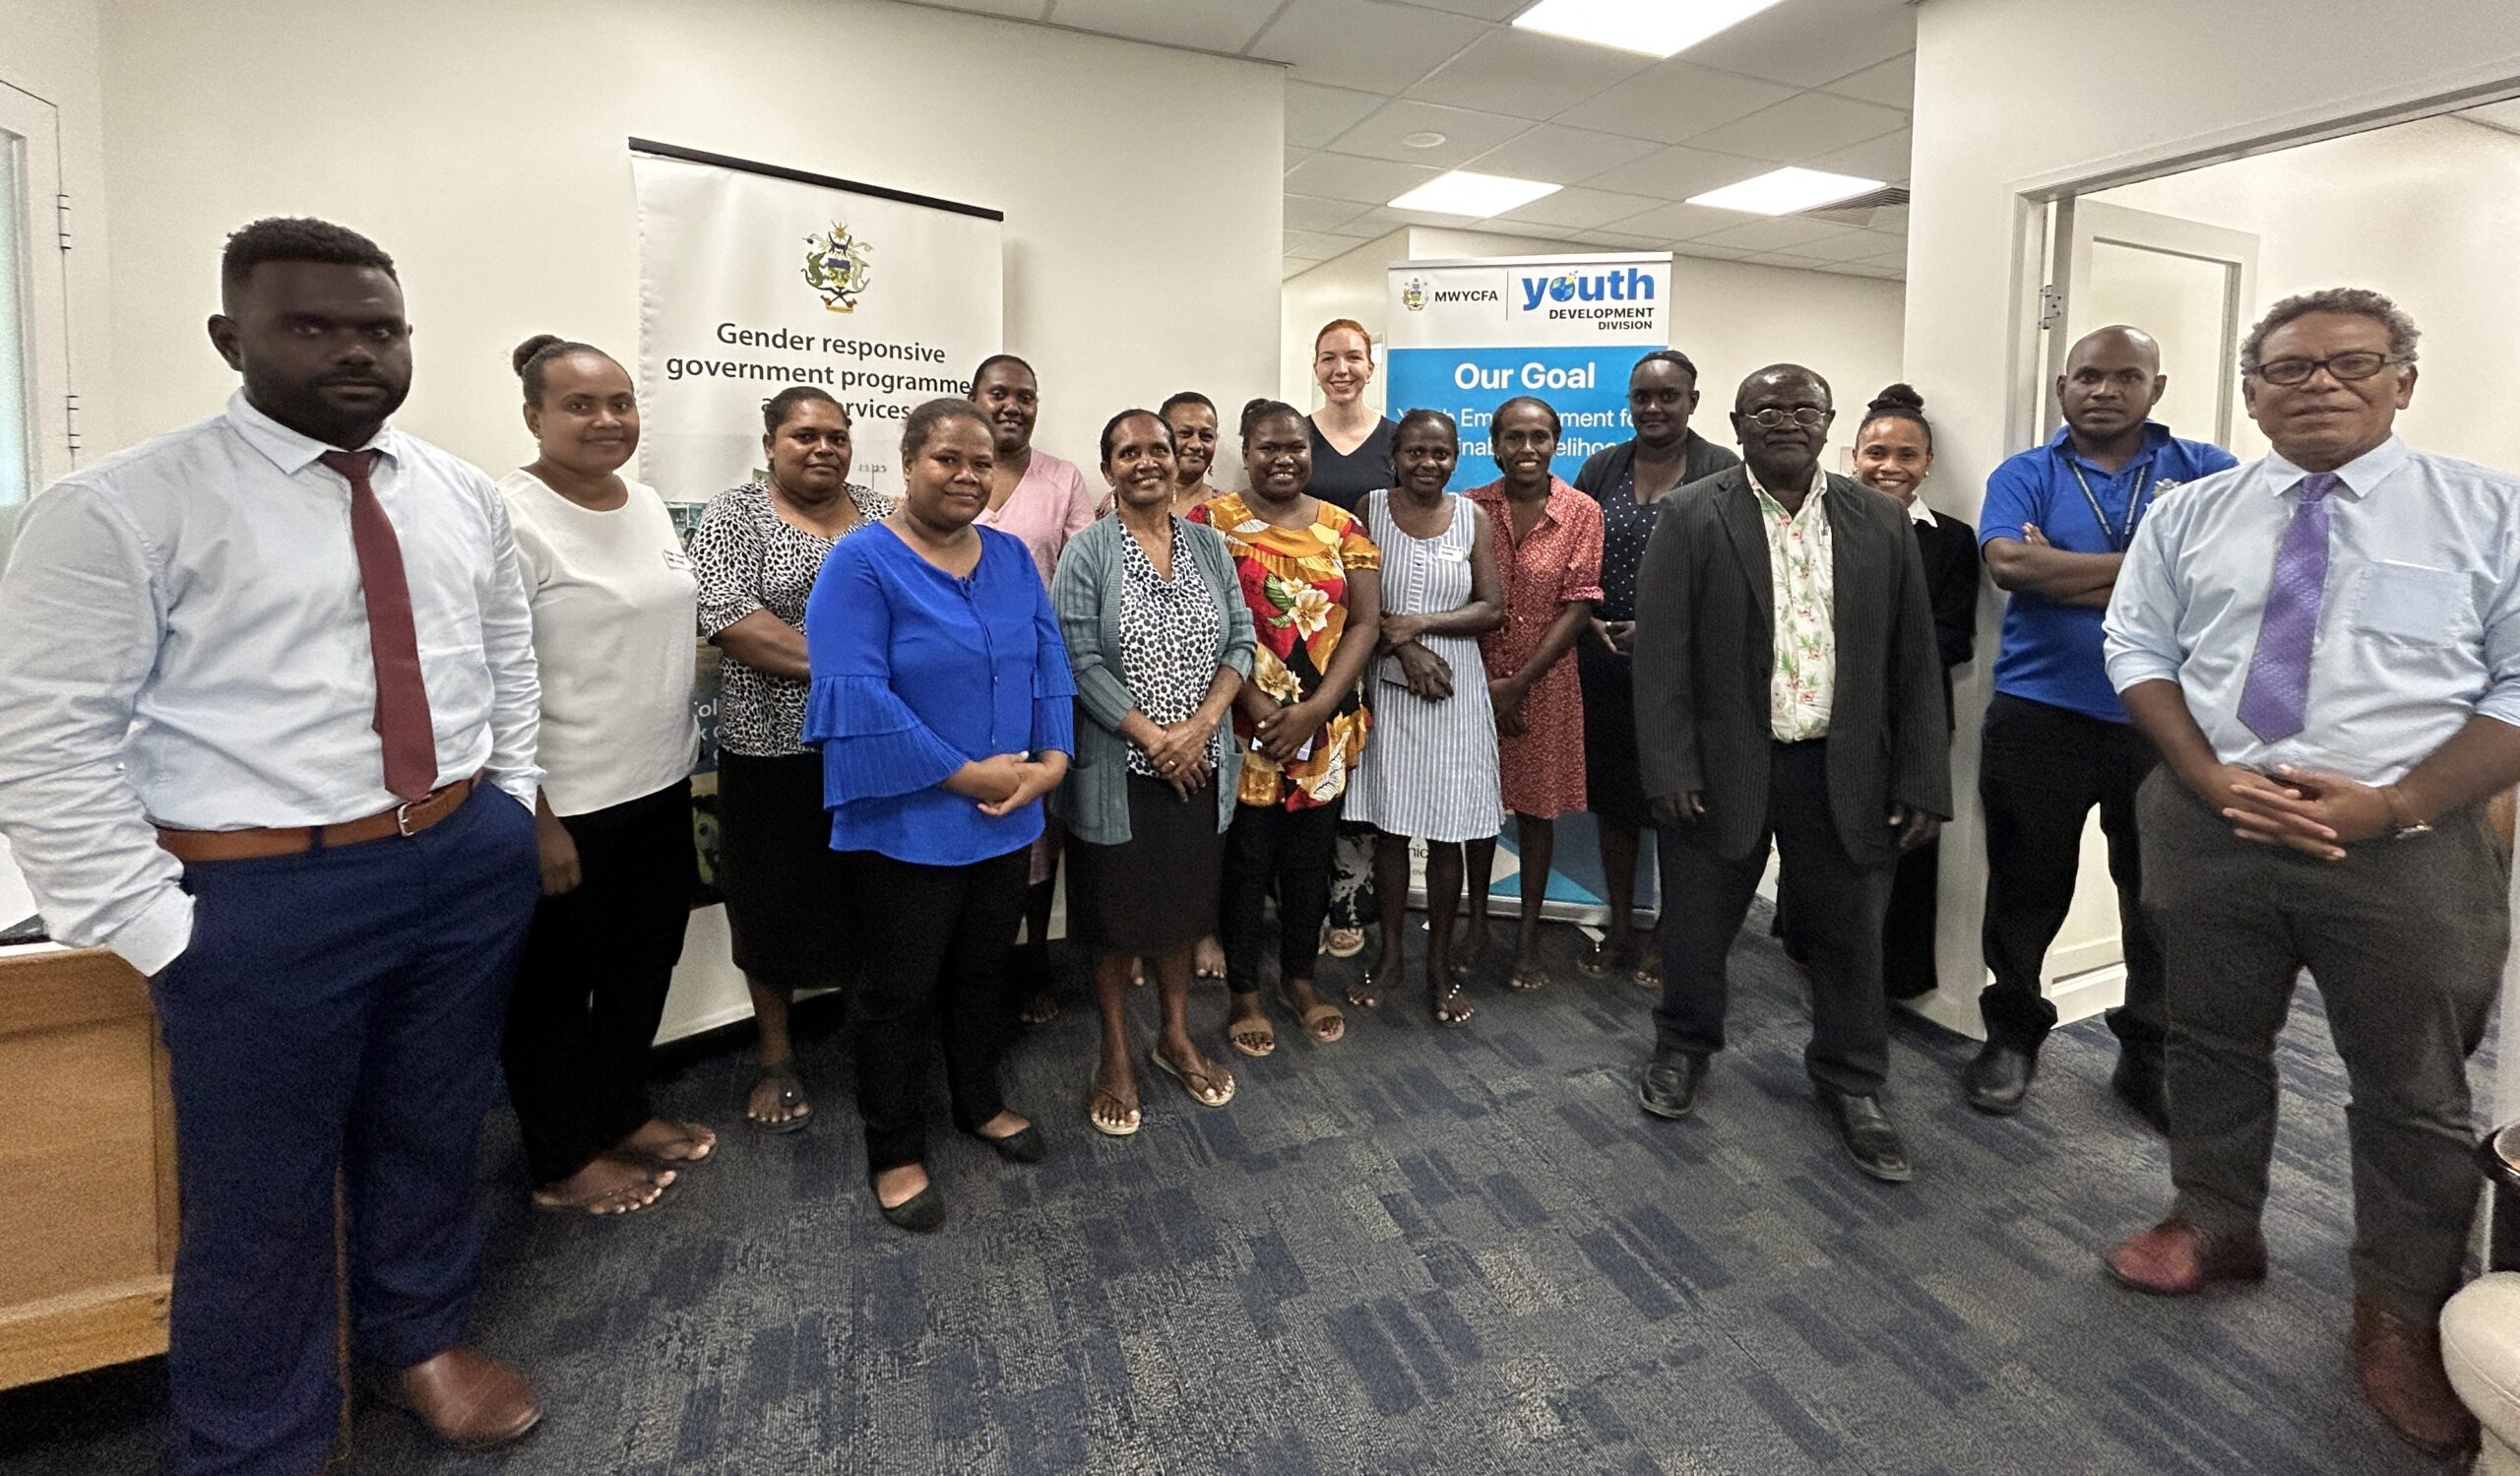 Train-the-Trainers Program with New Data on Access to Justice in Solomon Islands 